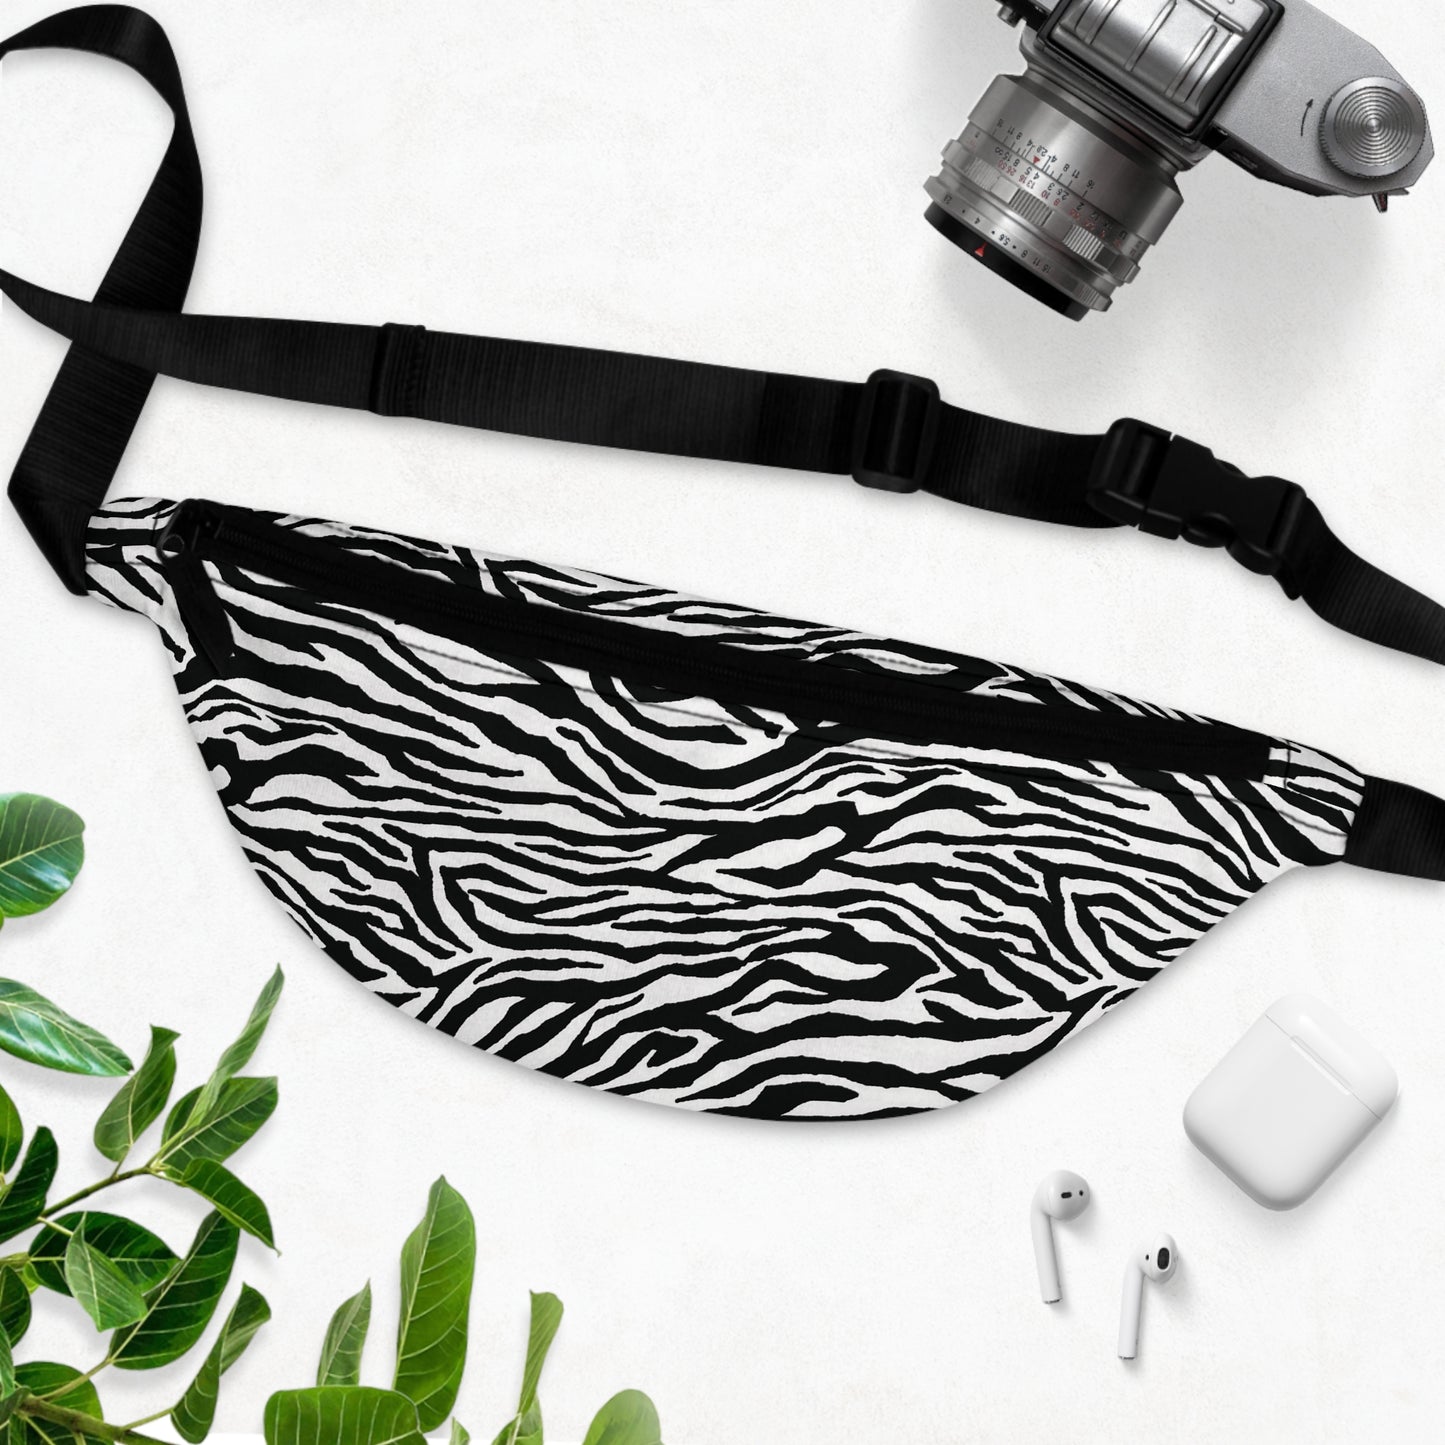 Our zebra animal print anti theft fanny pack bag is perfect for traveling as well as errands - inside a net divides a generous compartment with a zippered pocket and 3 cc slots - outside is another smaller zippered pocket for quick access - a large sturdy black zipper is along the top of the bag - a black back - easy to clean material and bright high quality print. 